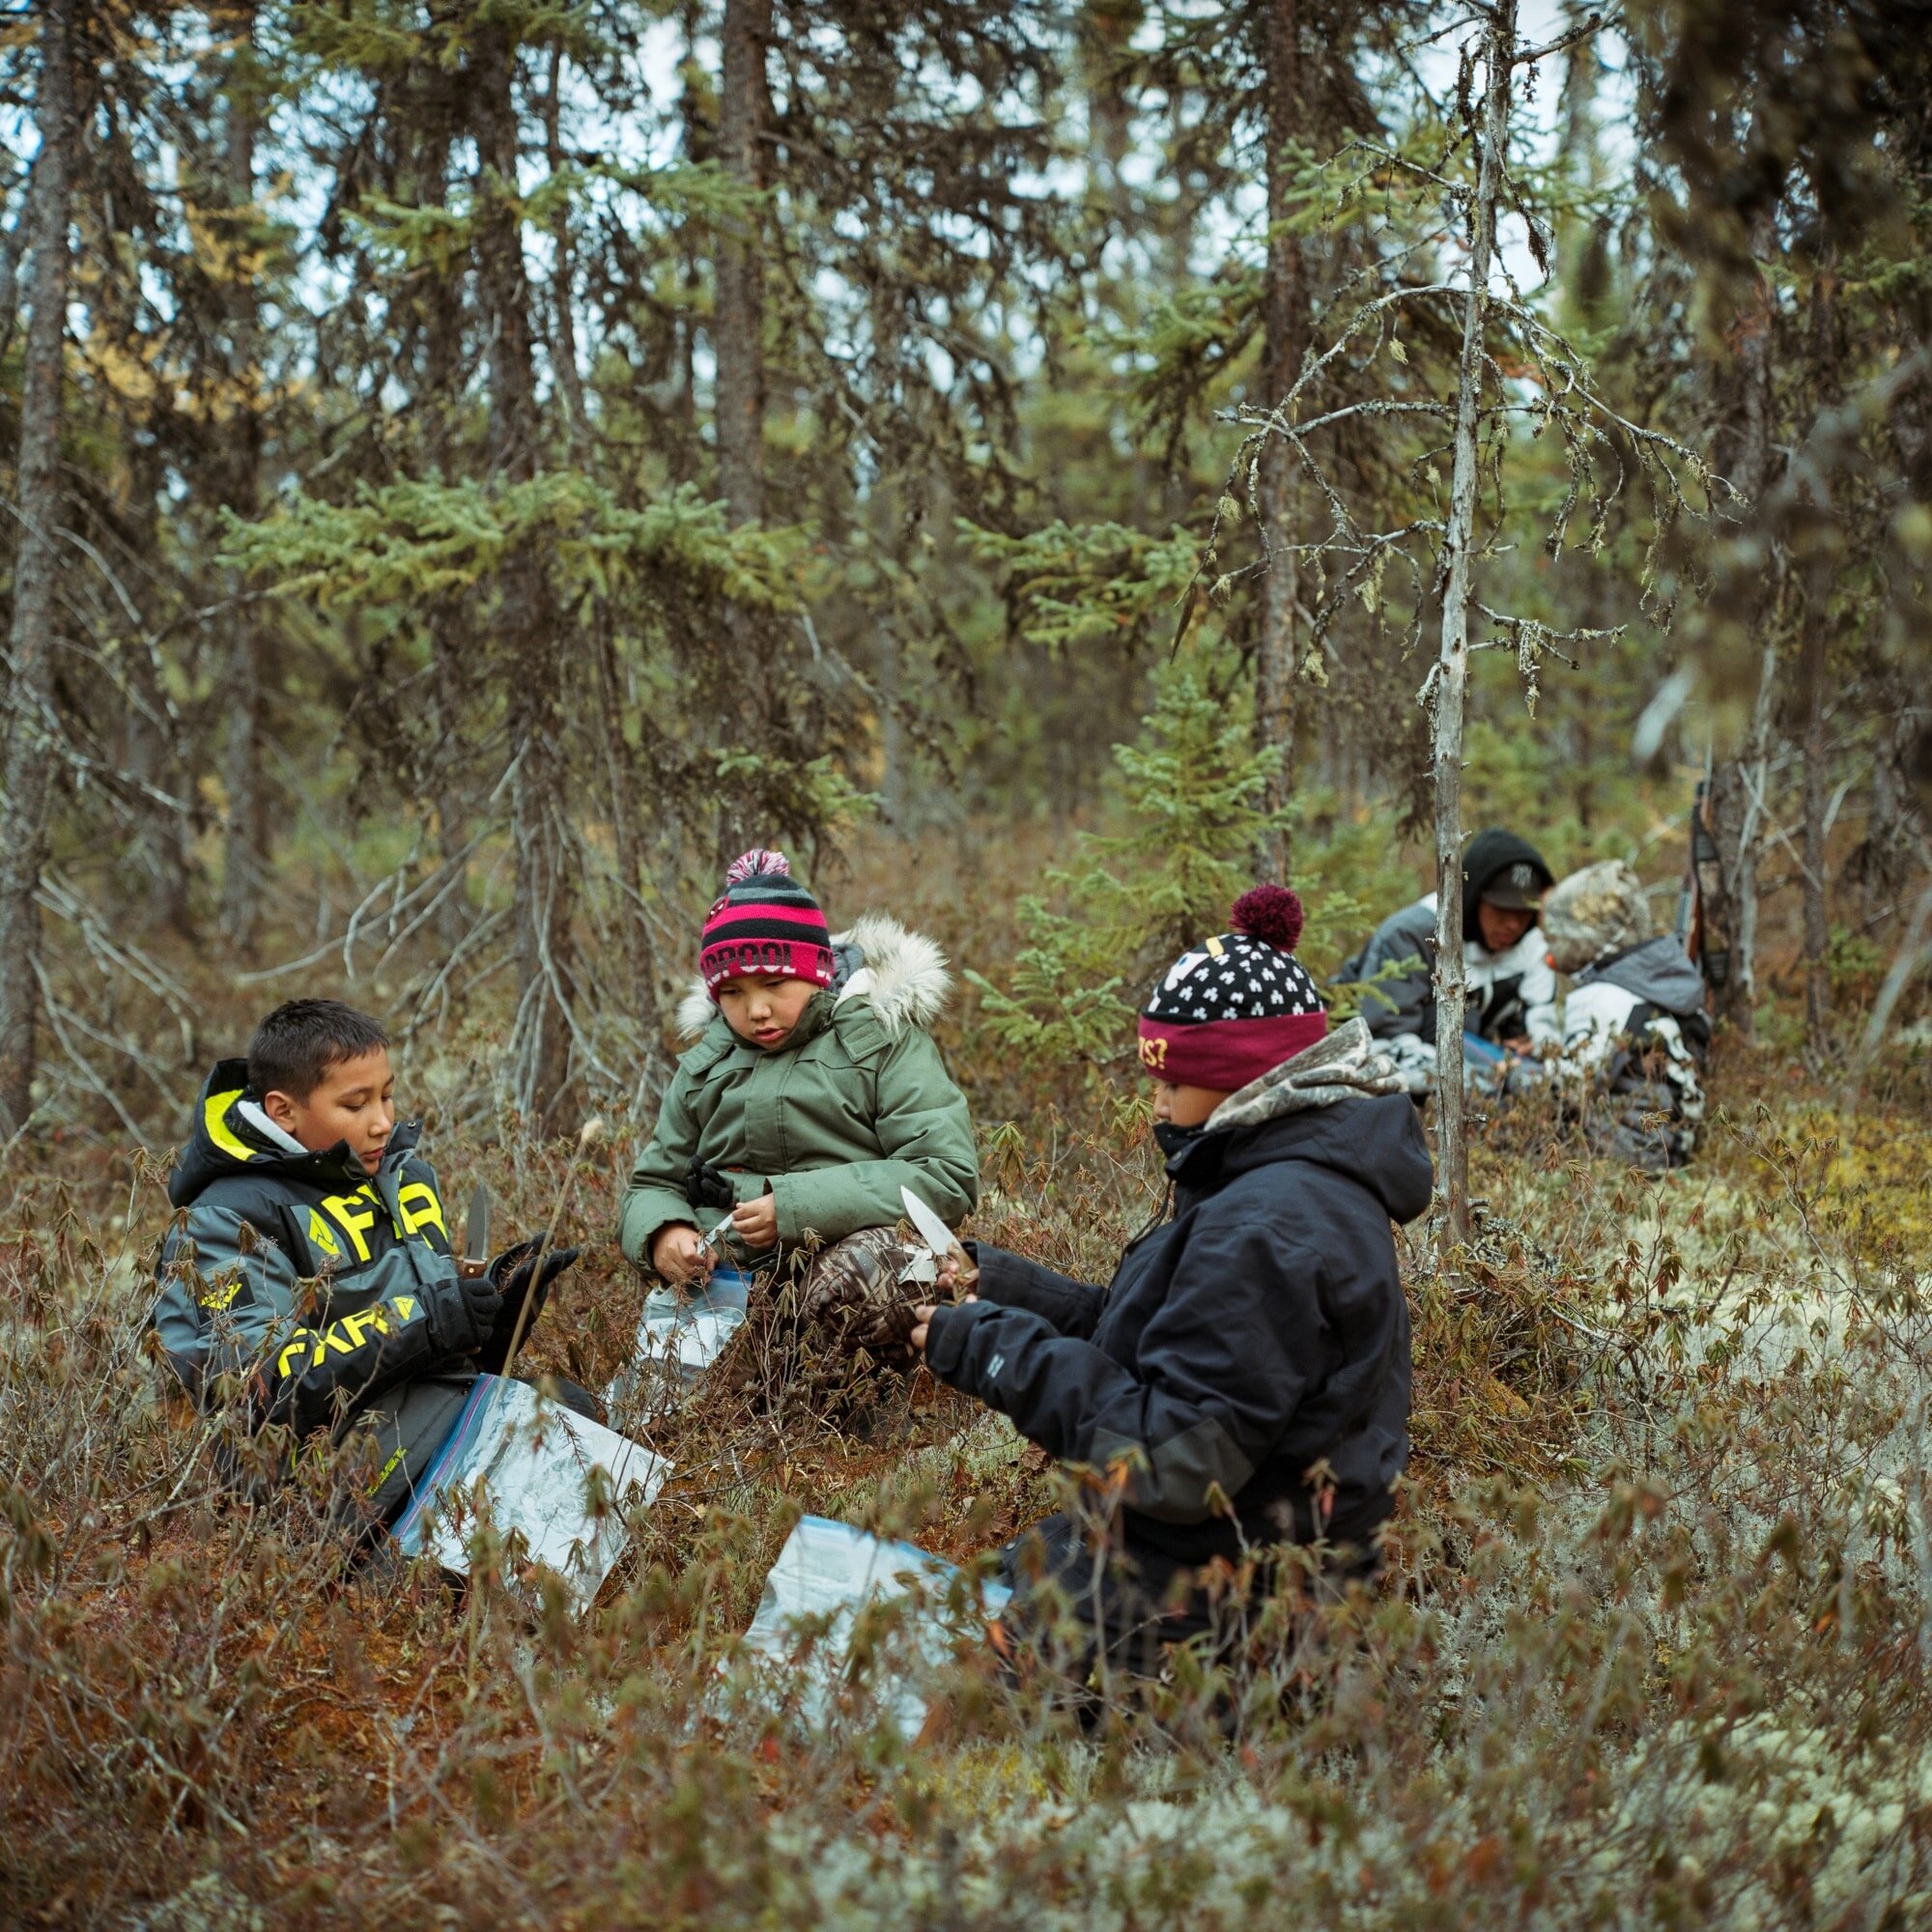 From left to right: Cohen, Carter and their cousin Richard harvest plants on an island in the Churchill River during a moose hunting trip. Annual hunting trips to the traplines are supported by funding from Manitoba Hydro, which covers the cost of f…